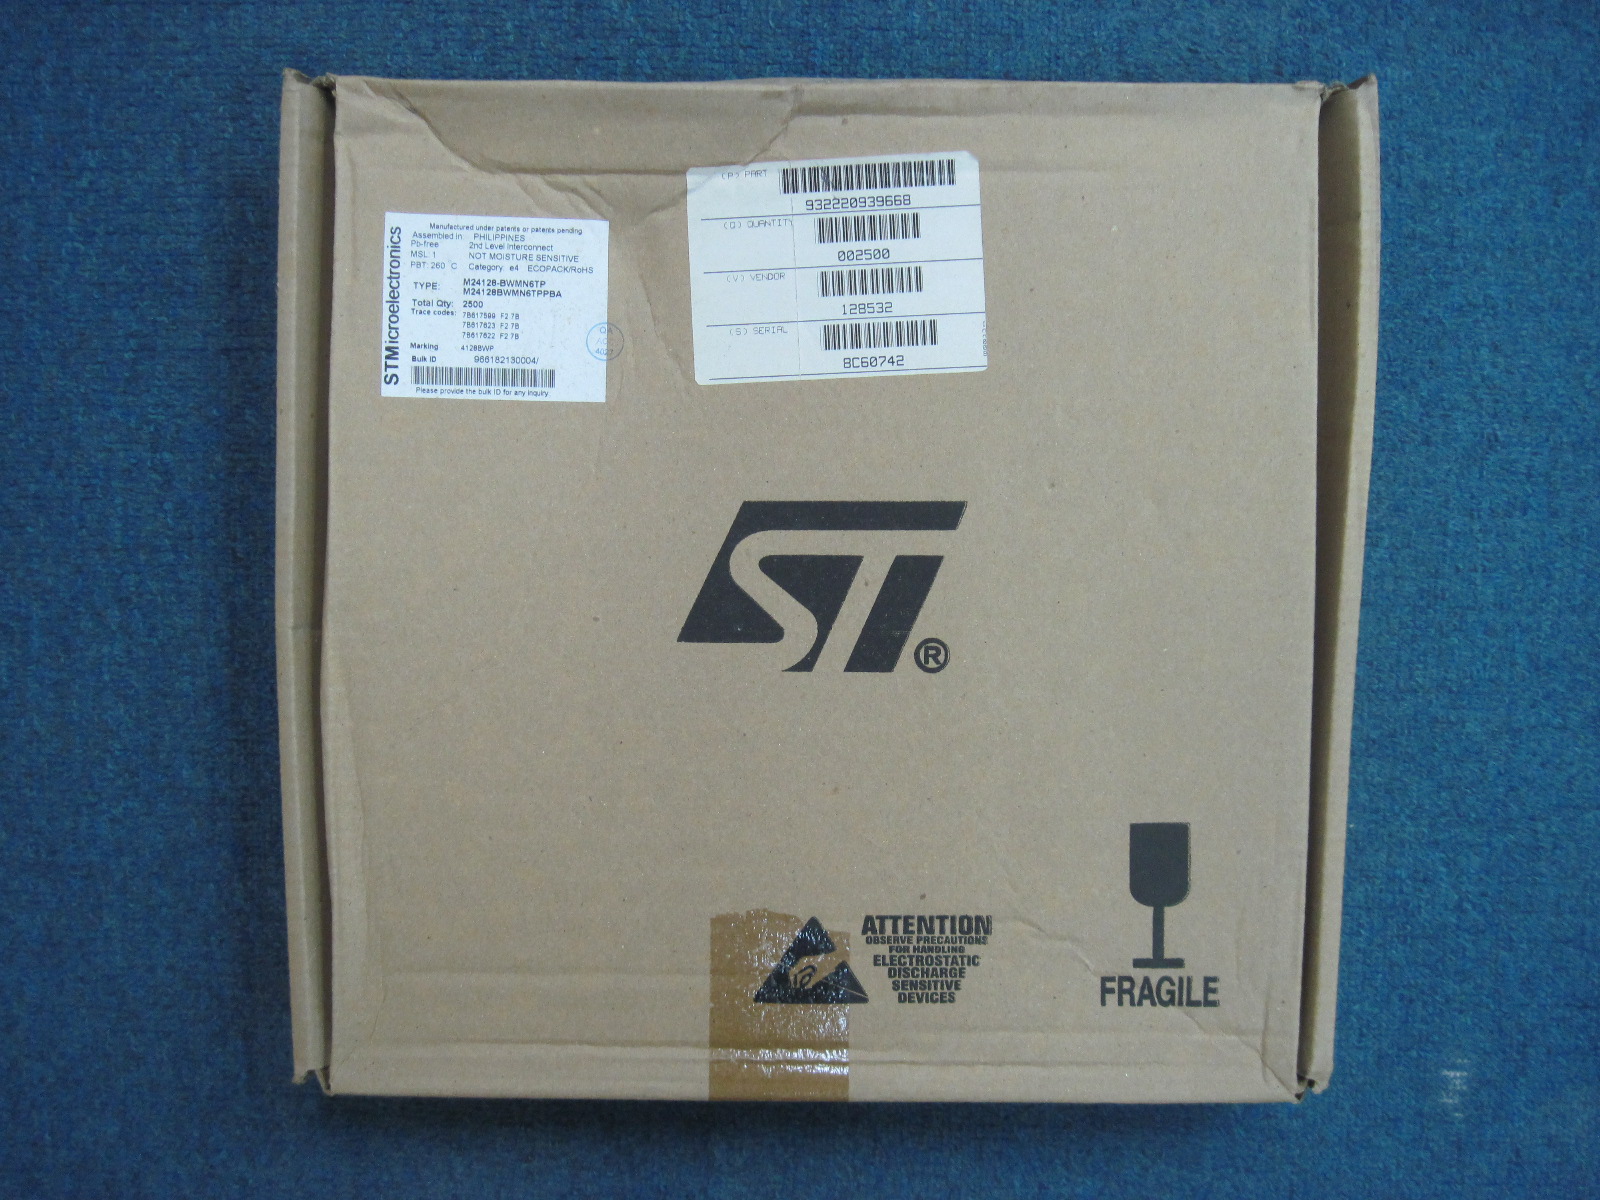 ST brand electronic components